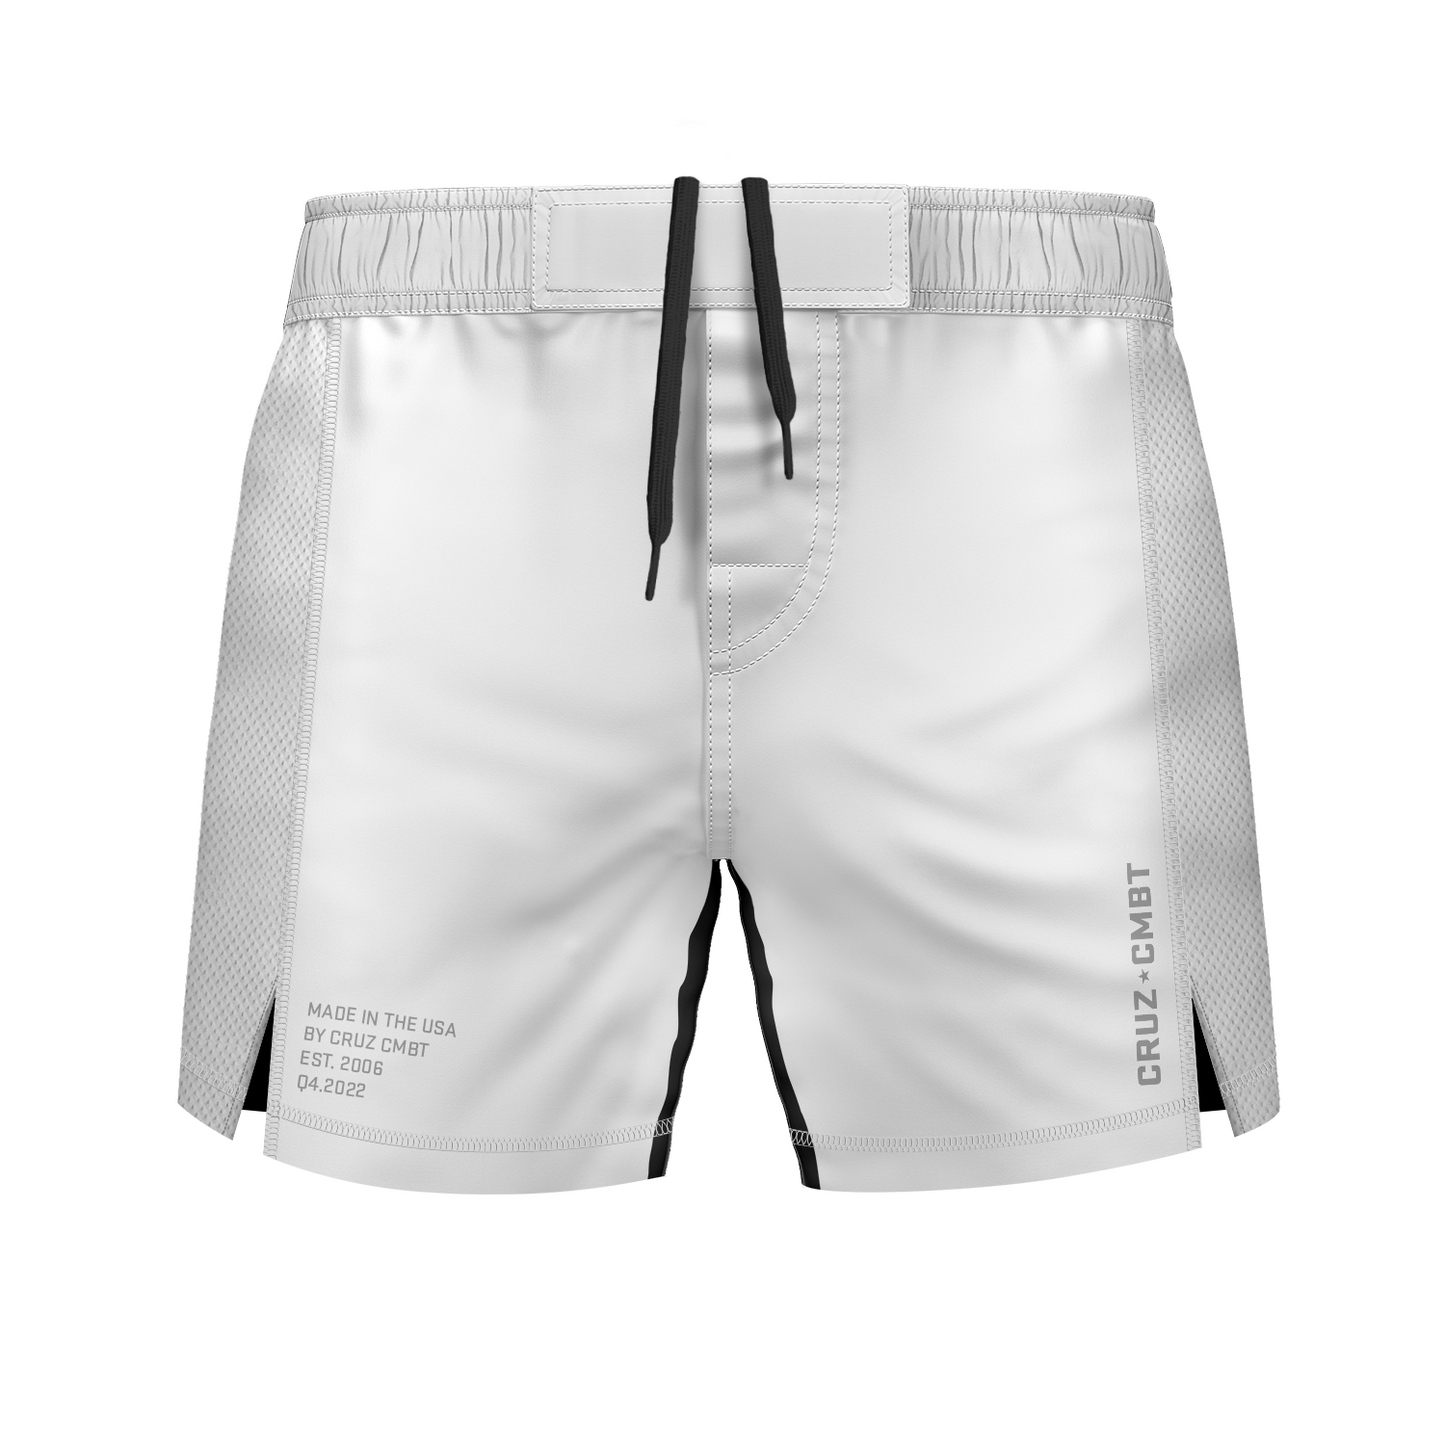 Base Collection men's fight shorts, white